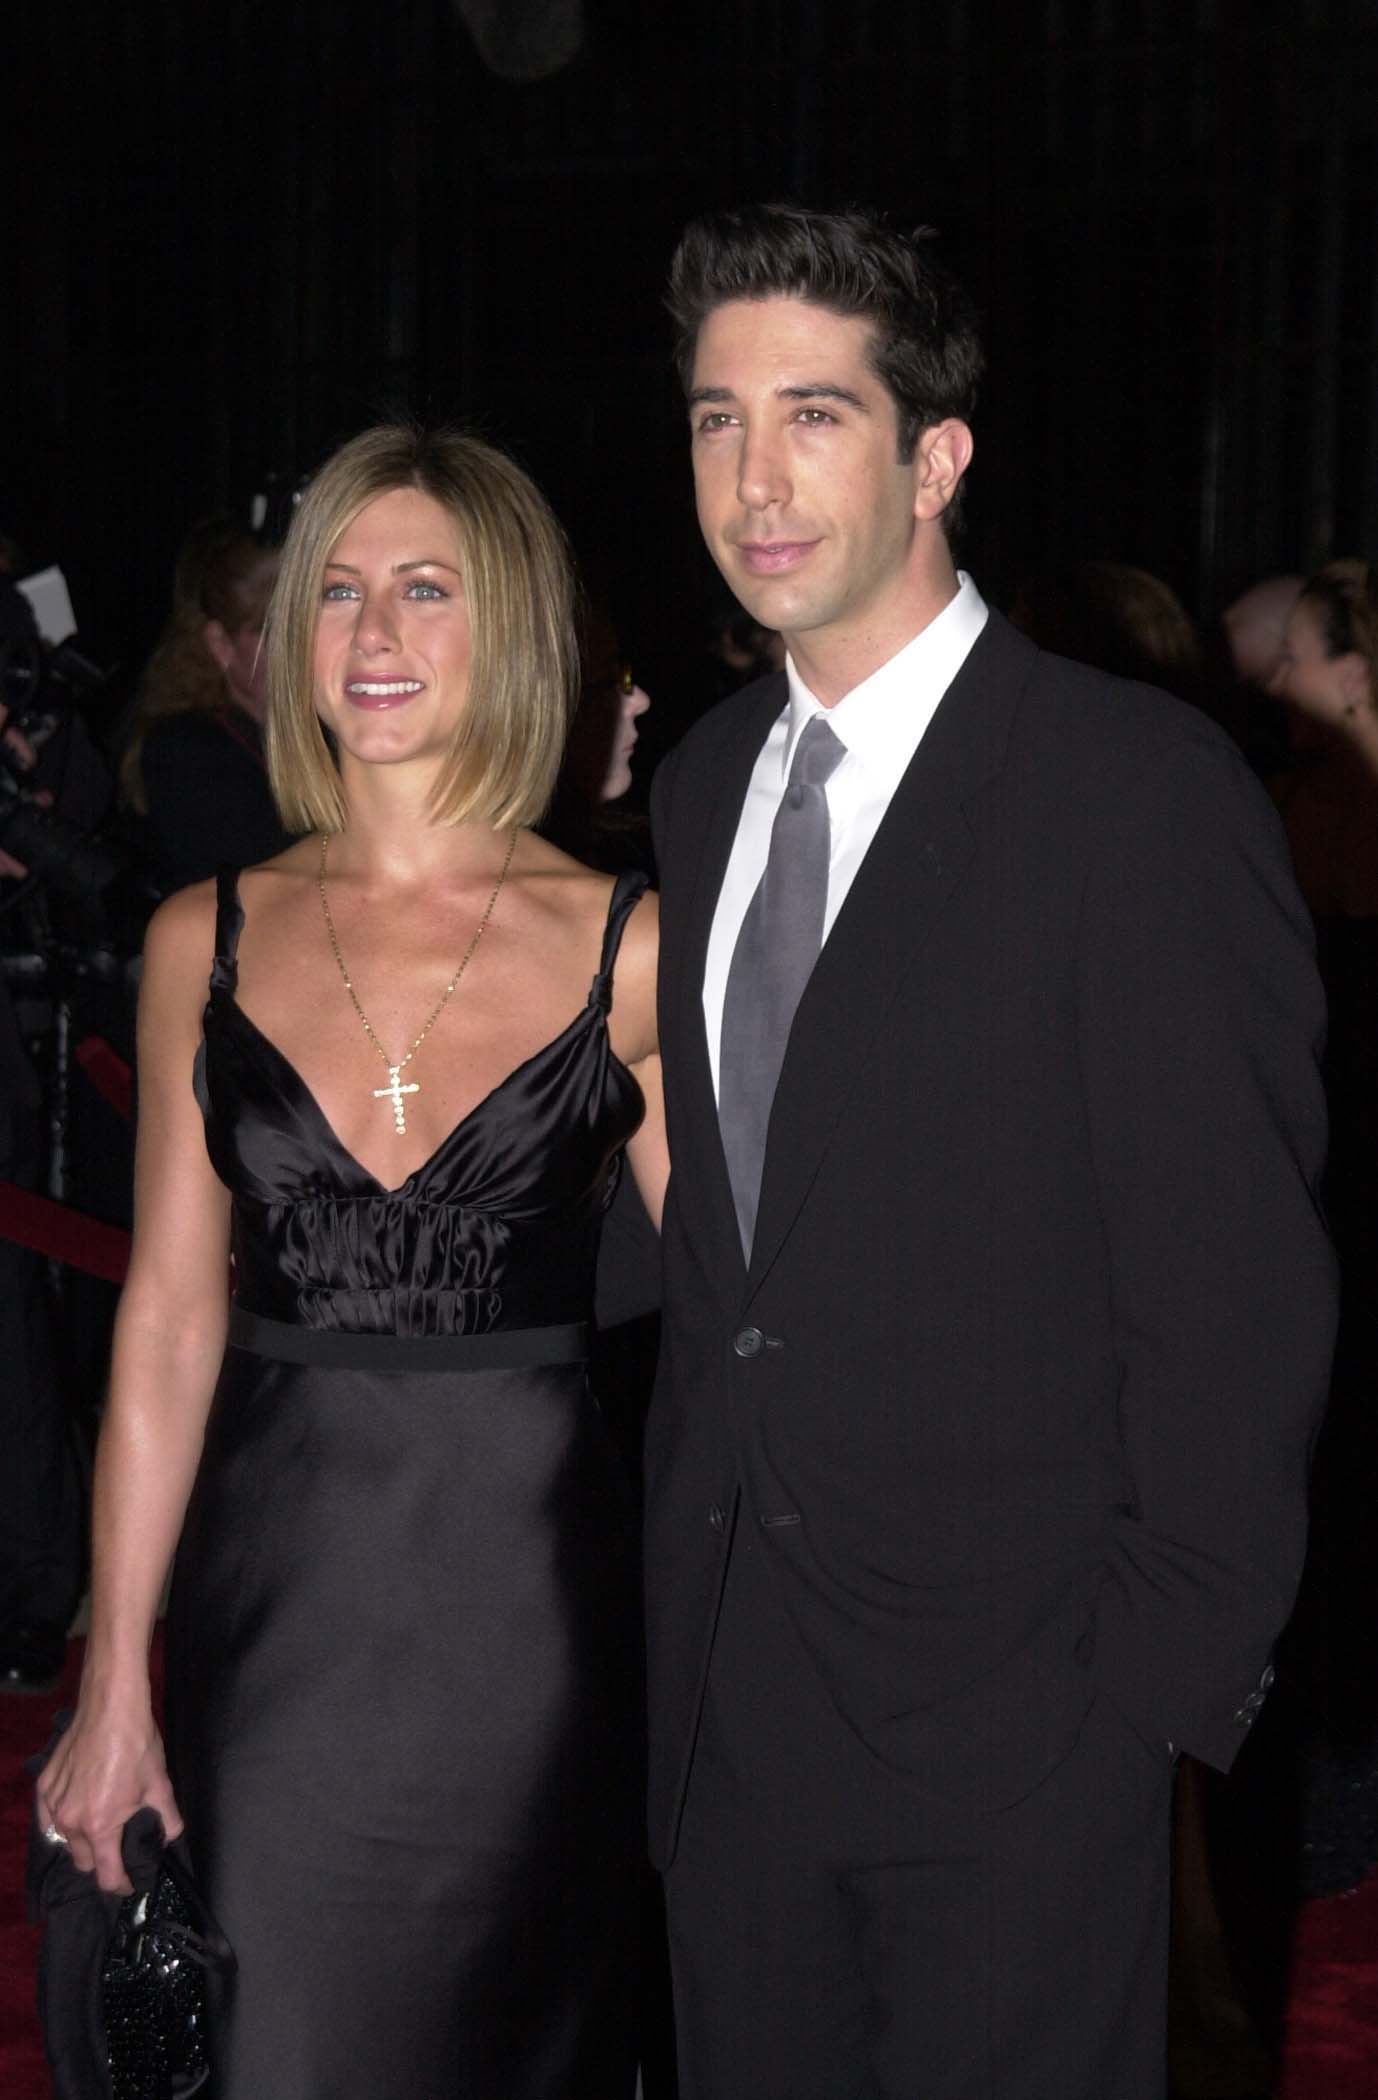 Jennifer Aniston and David Schwimmer at the Peoples Choice Awards in 2001 | Source: Getty Images